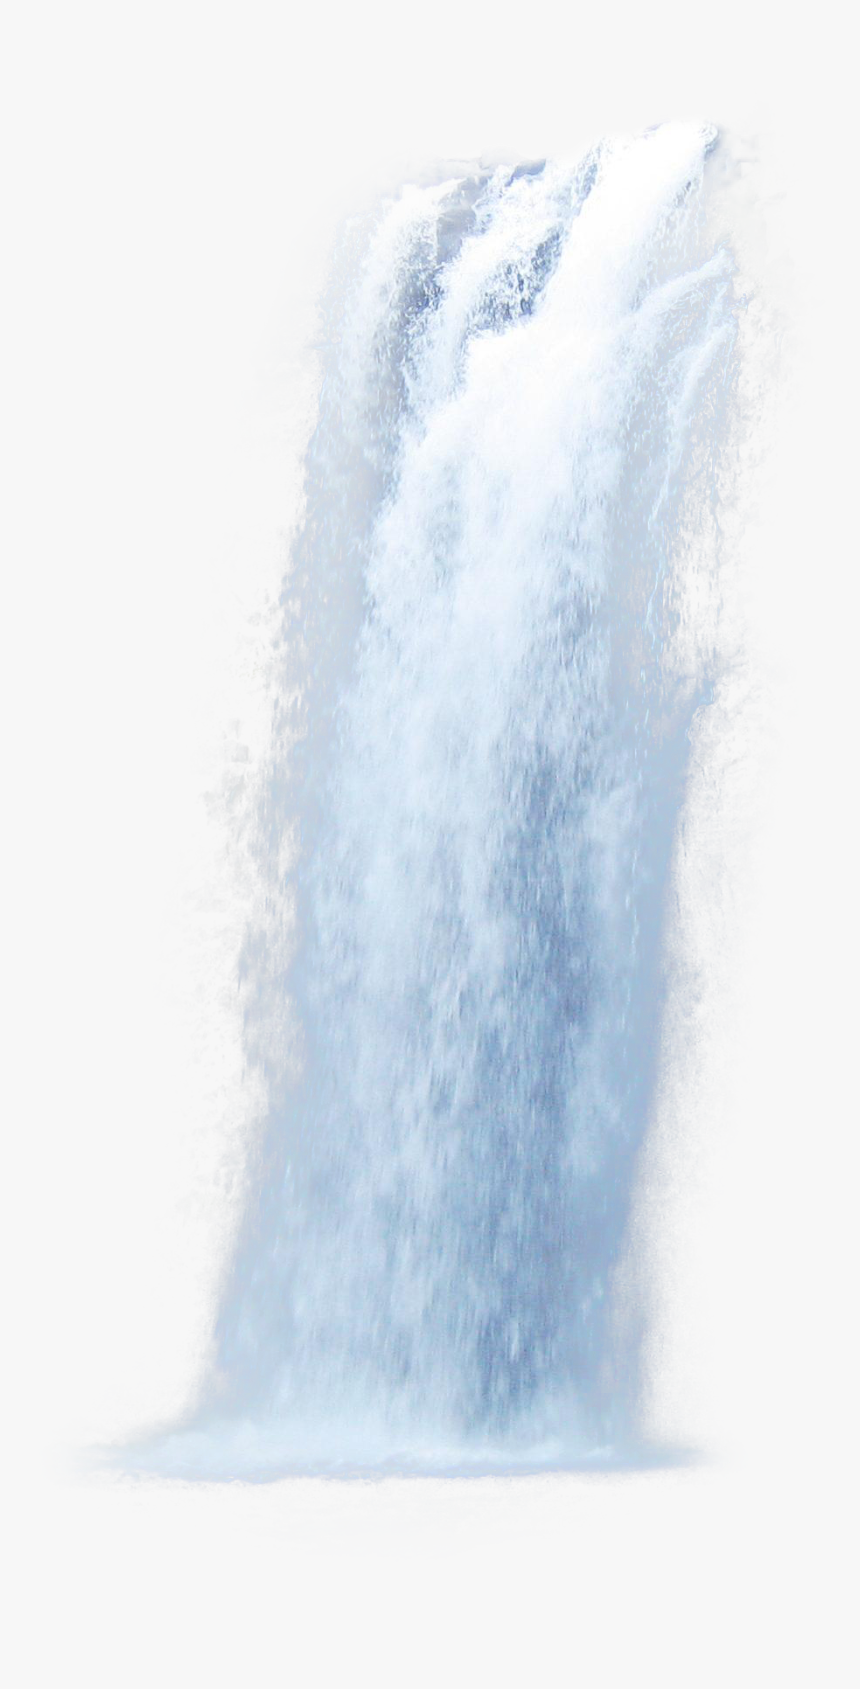 Waterfall Png, Transparent Png, Free Download